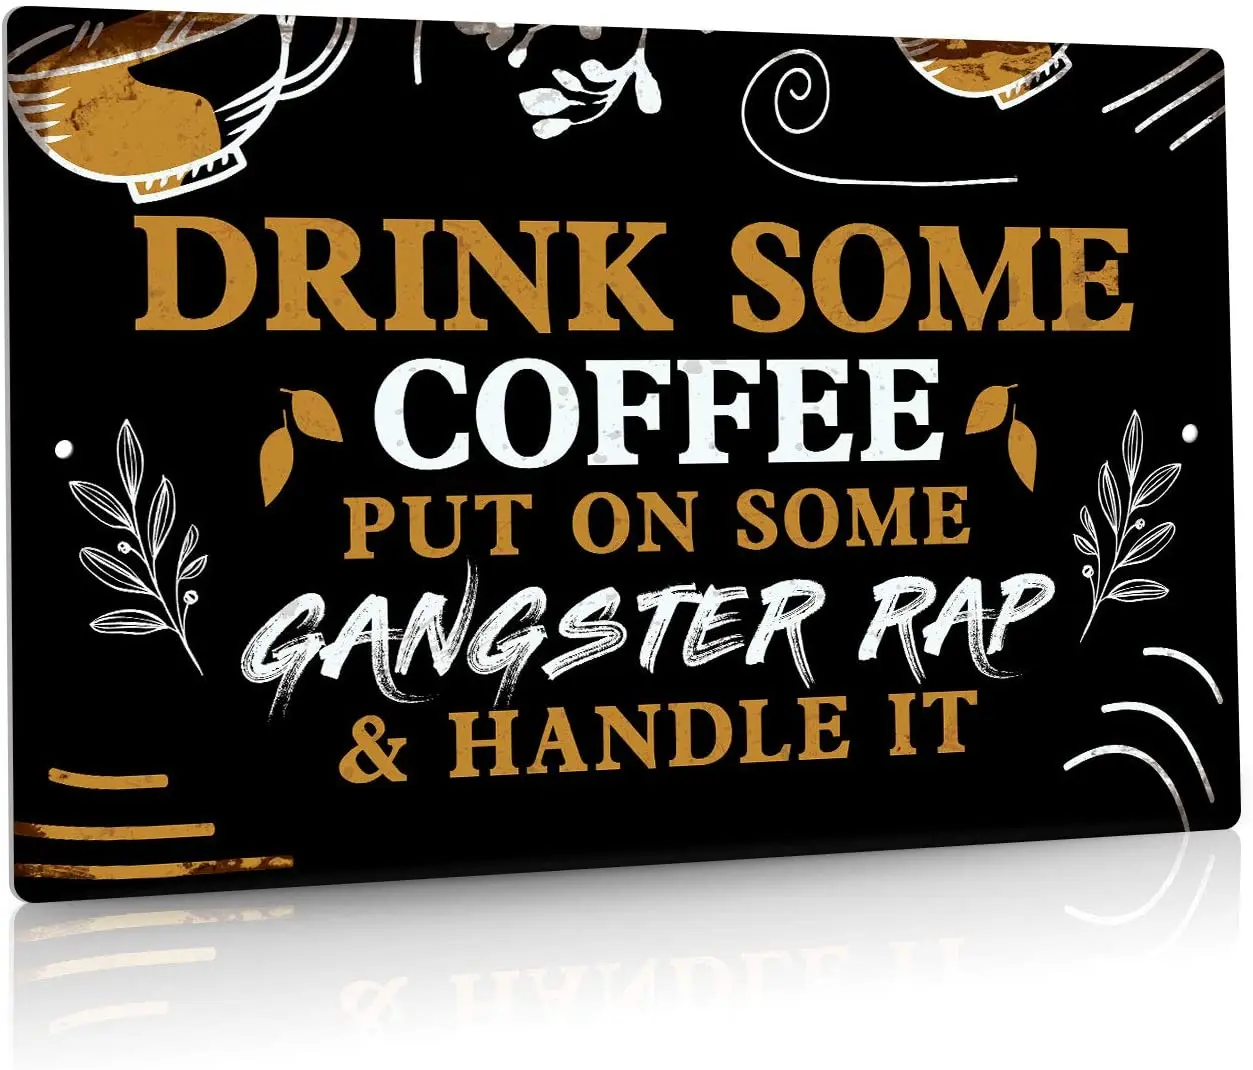 

Coffee Shop Wall Decoration Metal Tin Sign Drink Some Coffee Put on Some Cangster Rap and Handle It Metal Decorative Board